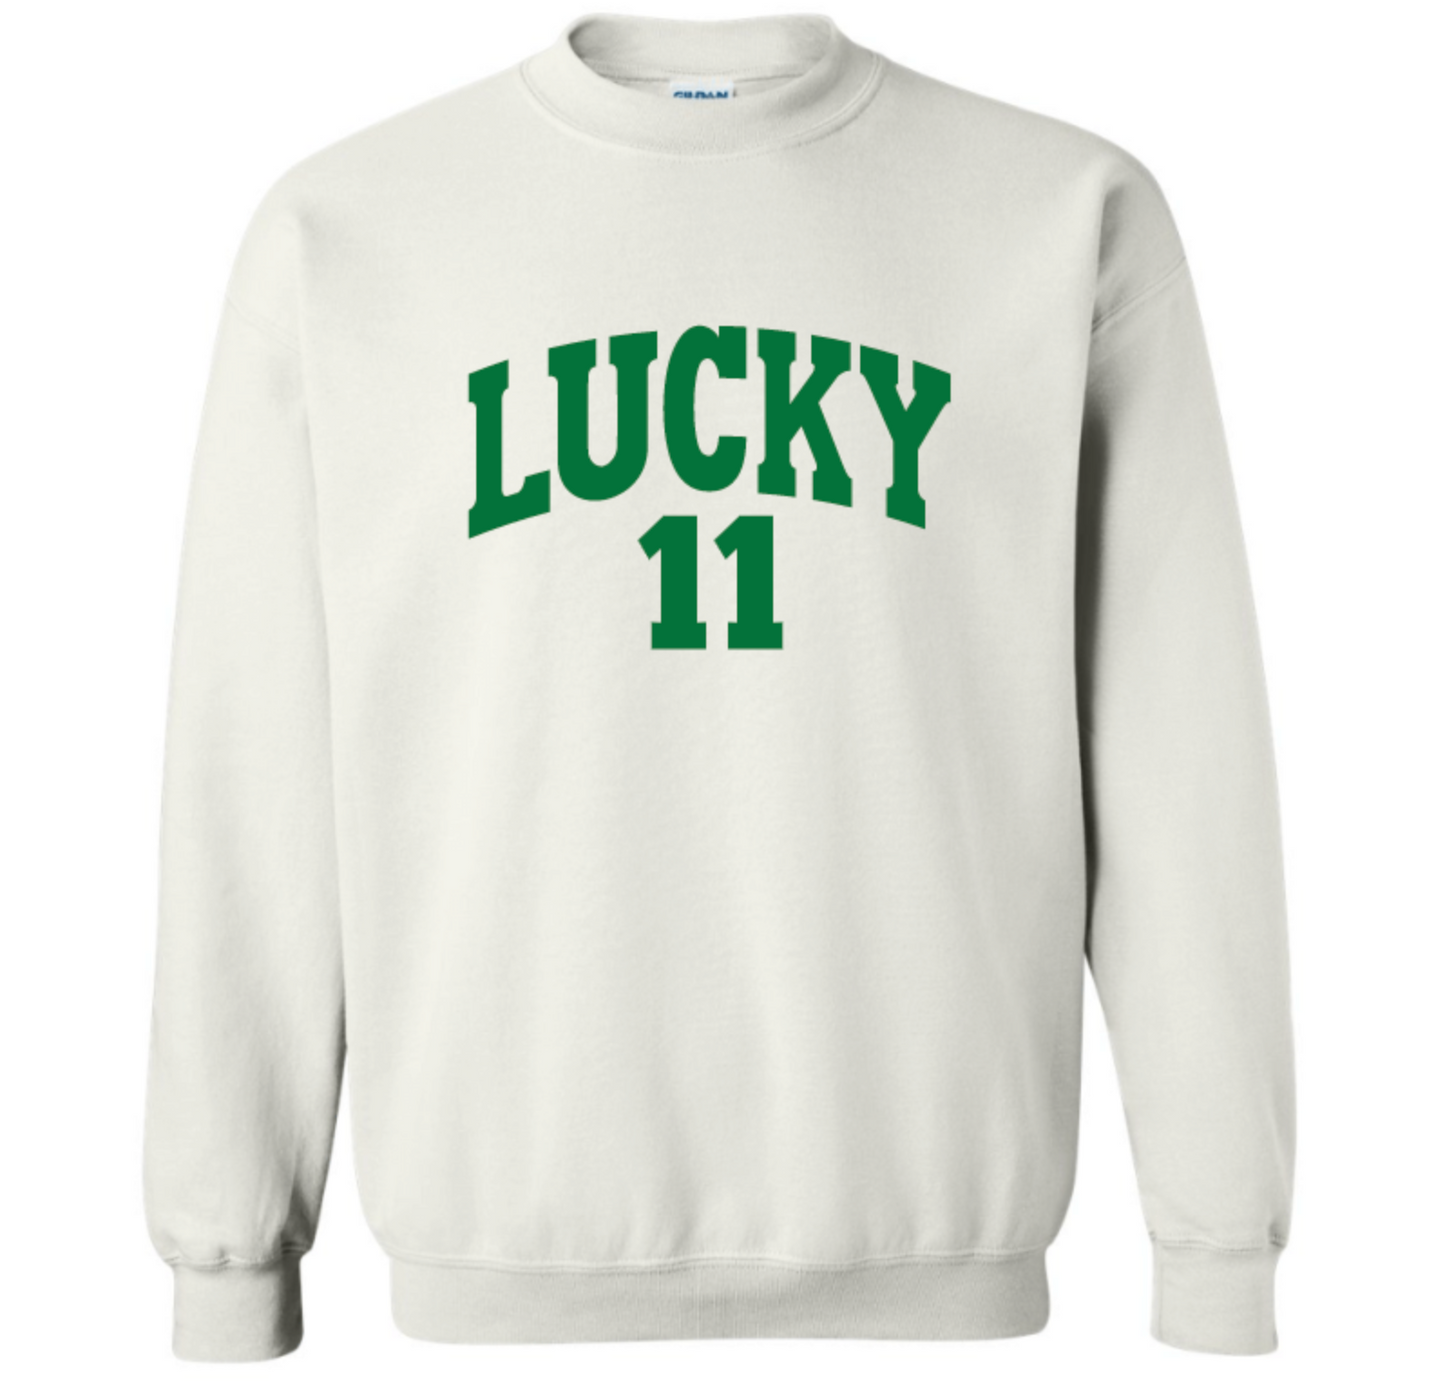 LUCKY ON WHITE WITH CUSTOM NUMBER BELOW LUCKY